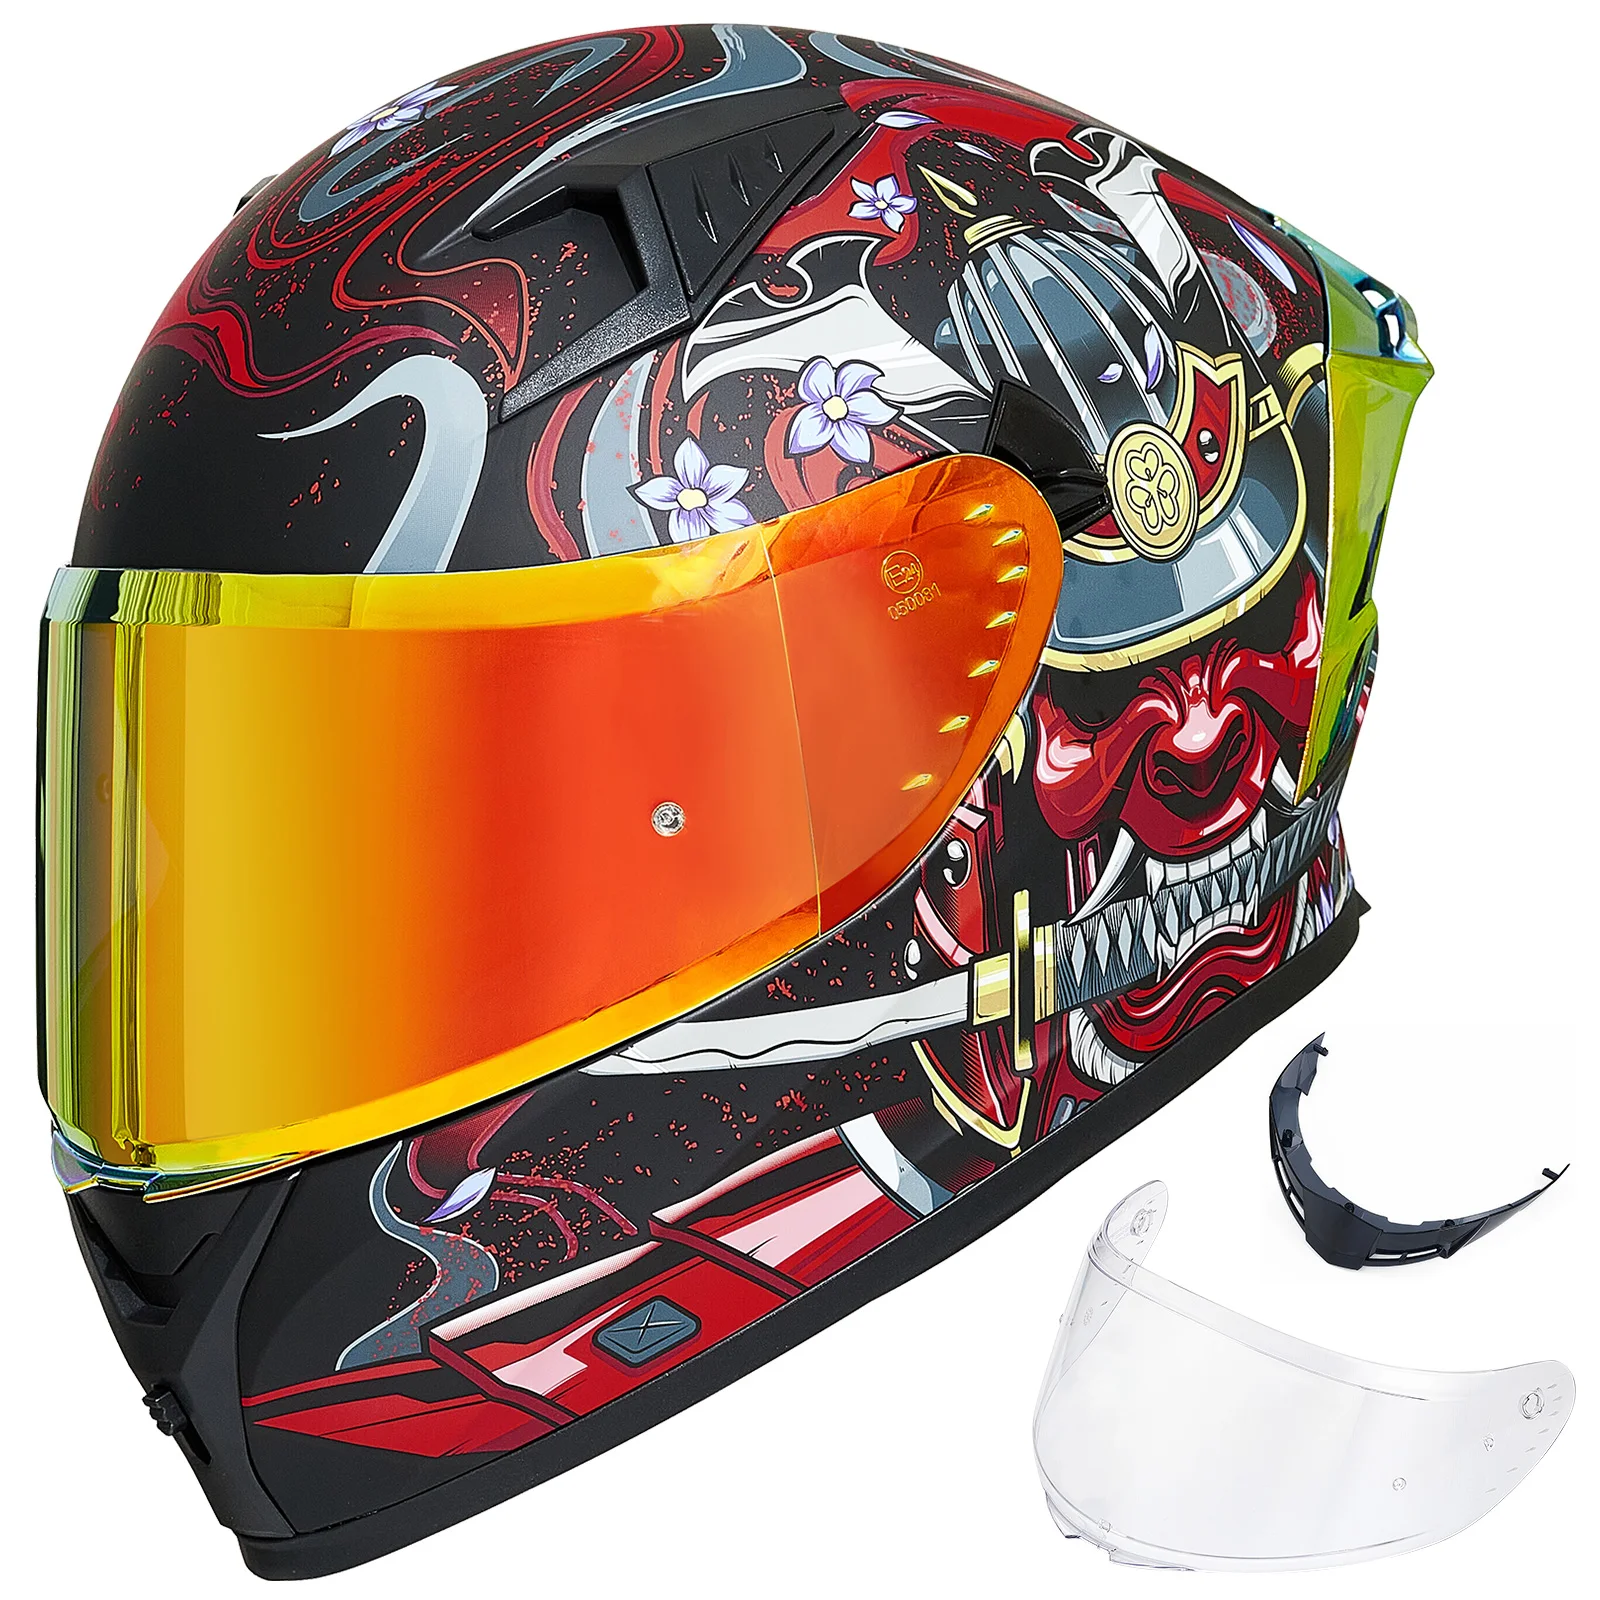 ILM Motorcycle Helmet Full Face with Pinlock Compatible Clear&Tinted Visors and Fins Street Bike Motocross Casco DOT